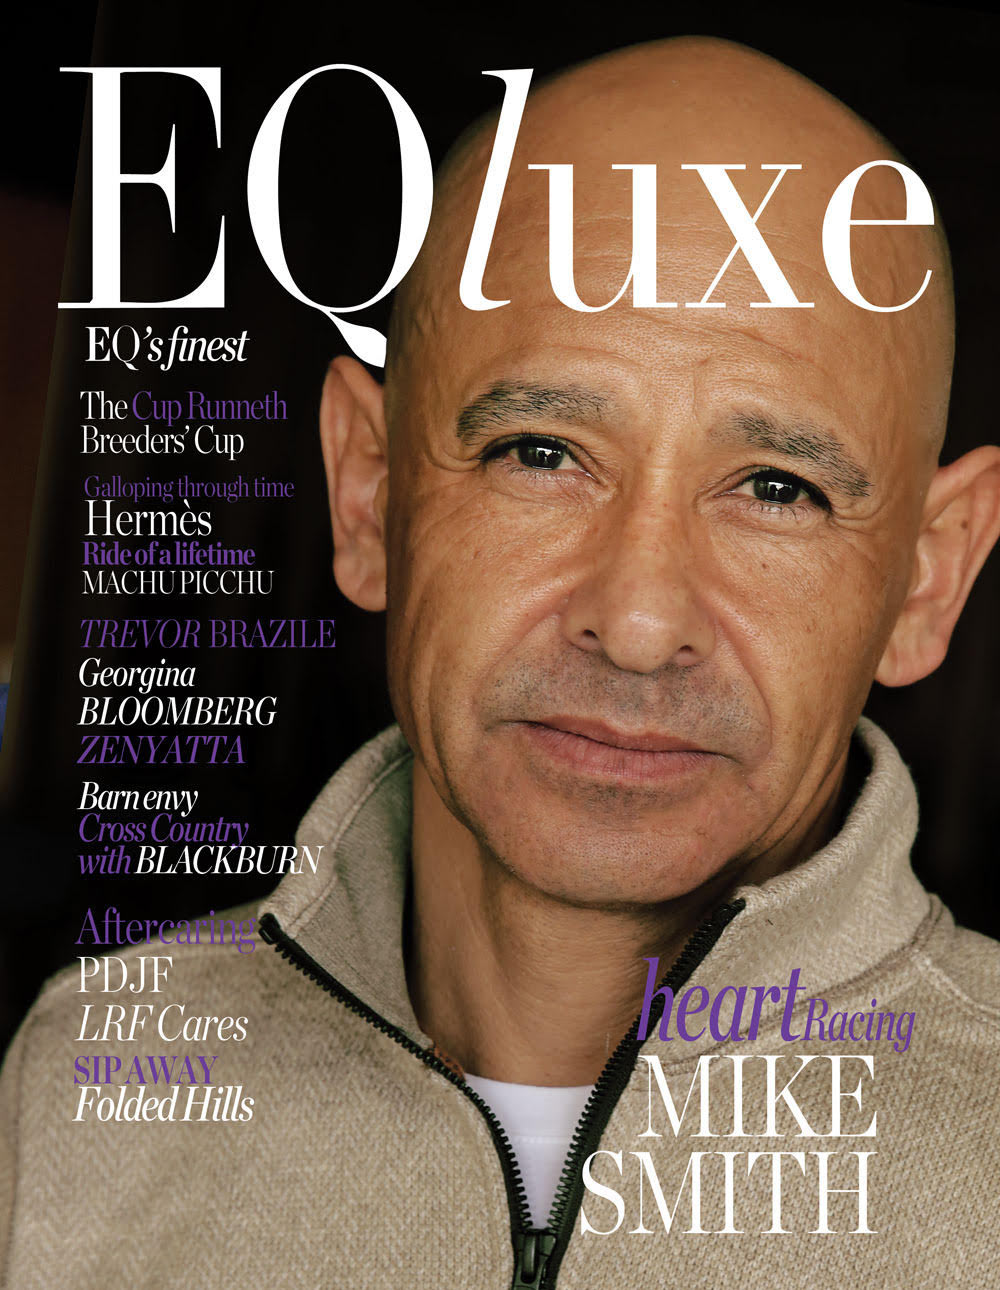 Mike Smith covers EQluxe magazine's iconic issue